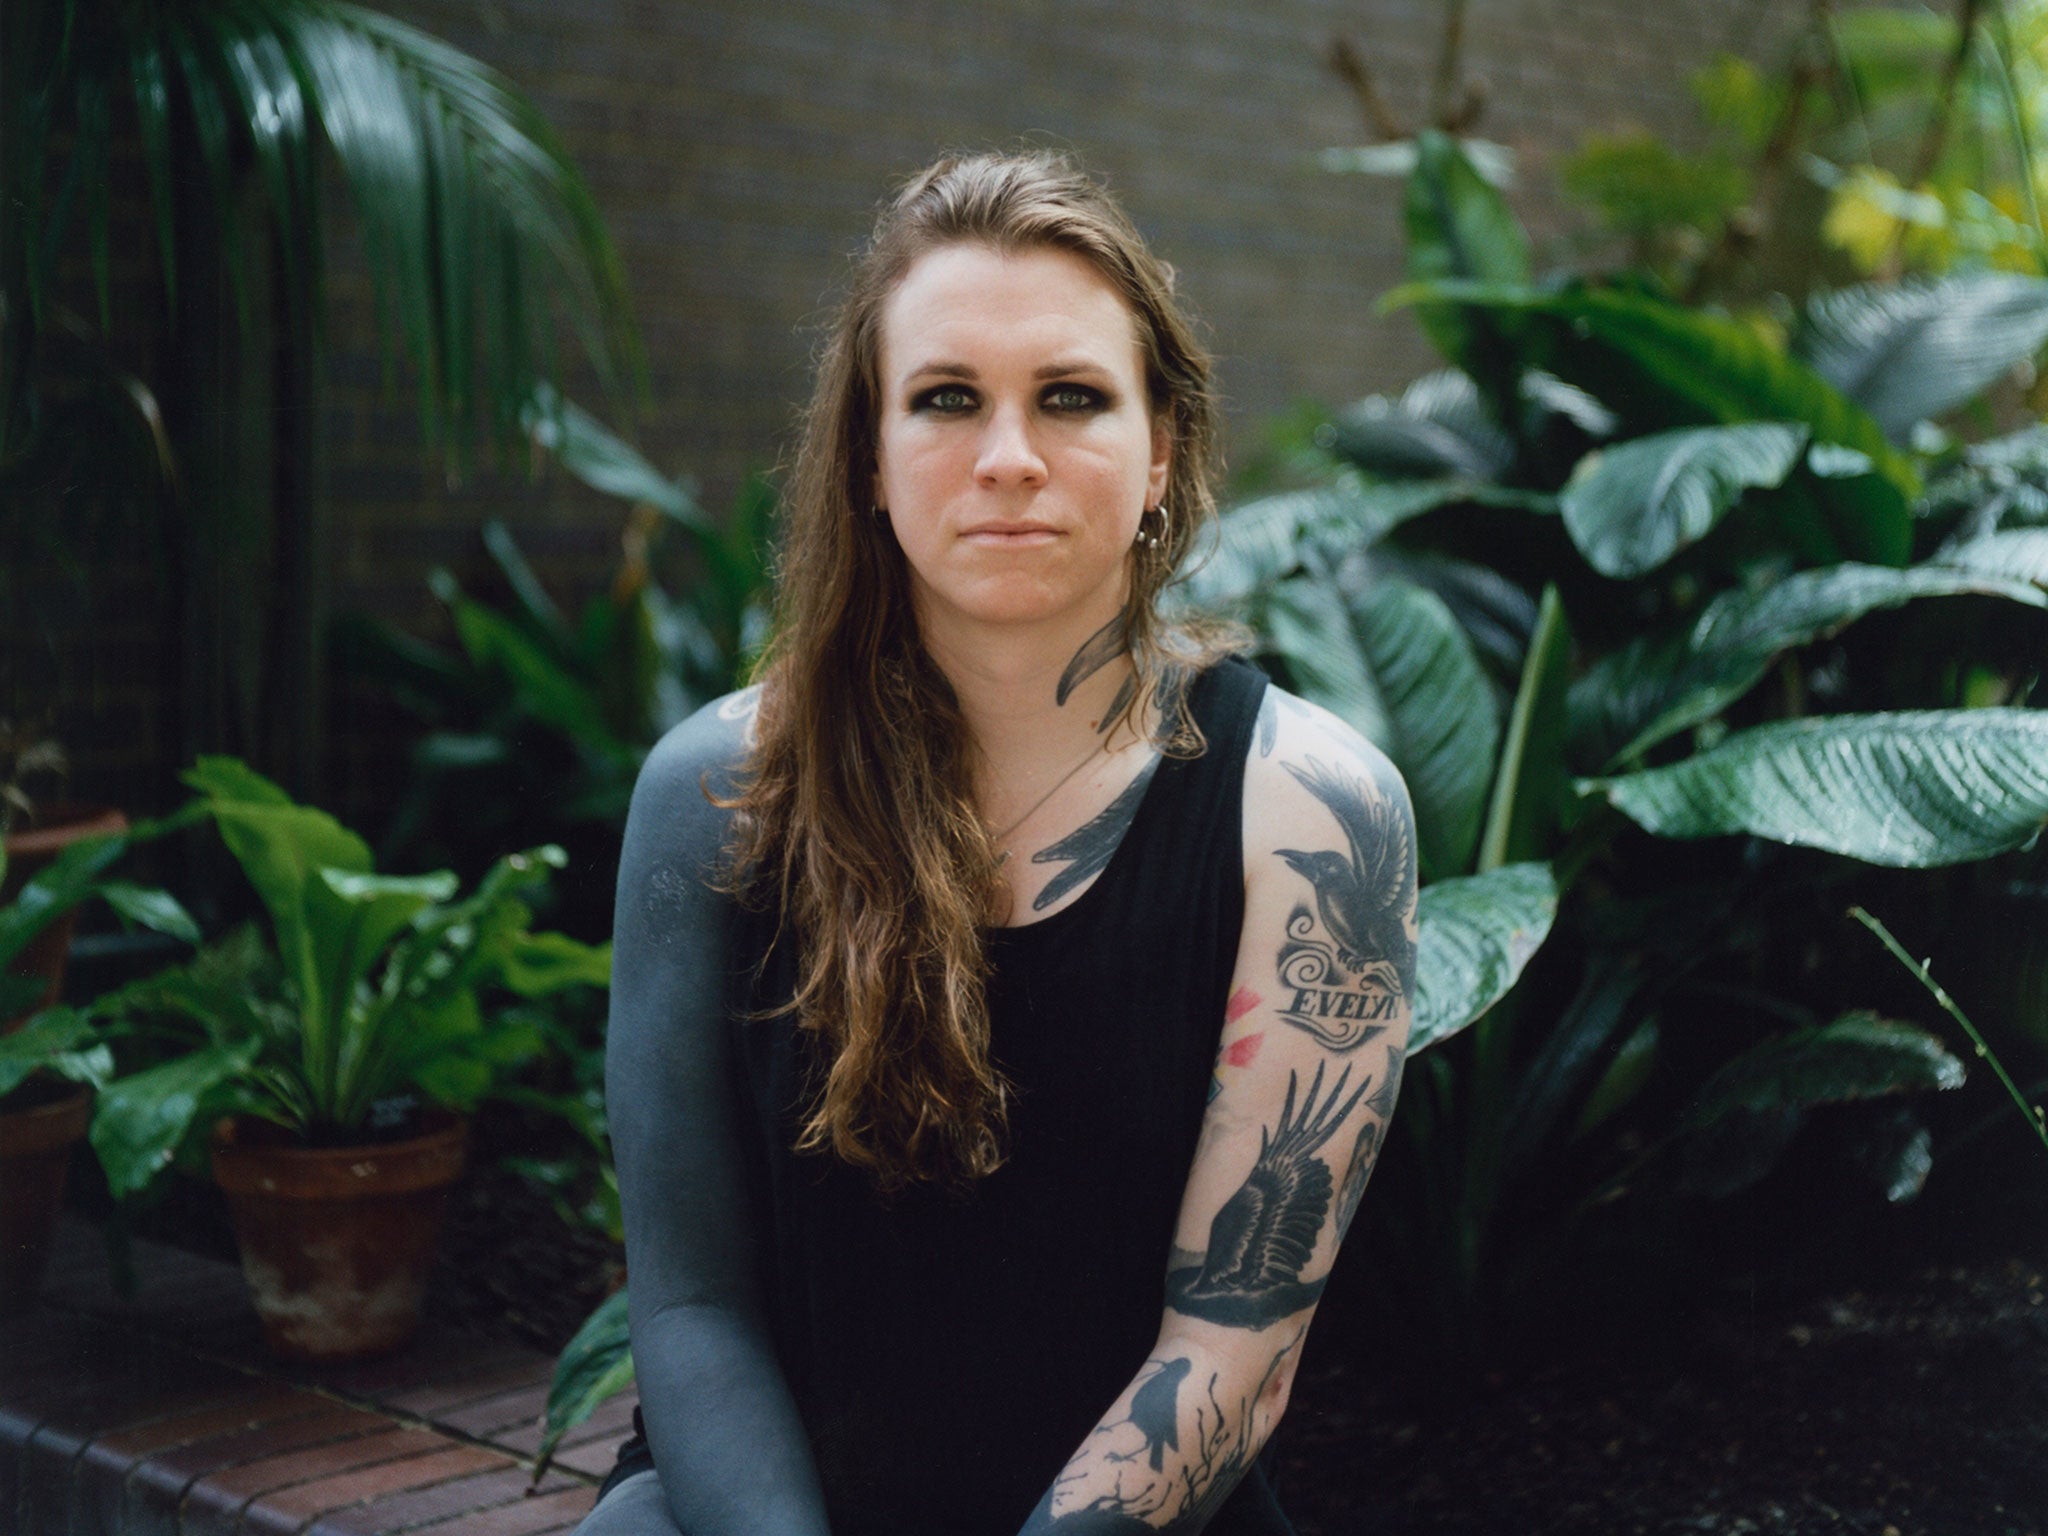 Laura Jane Grace: The Against Me! singer through the years